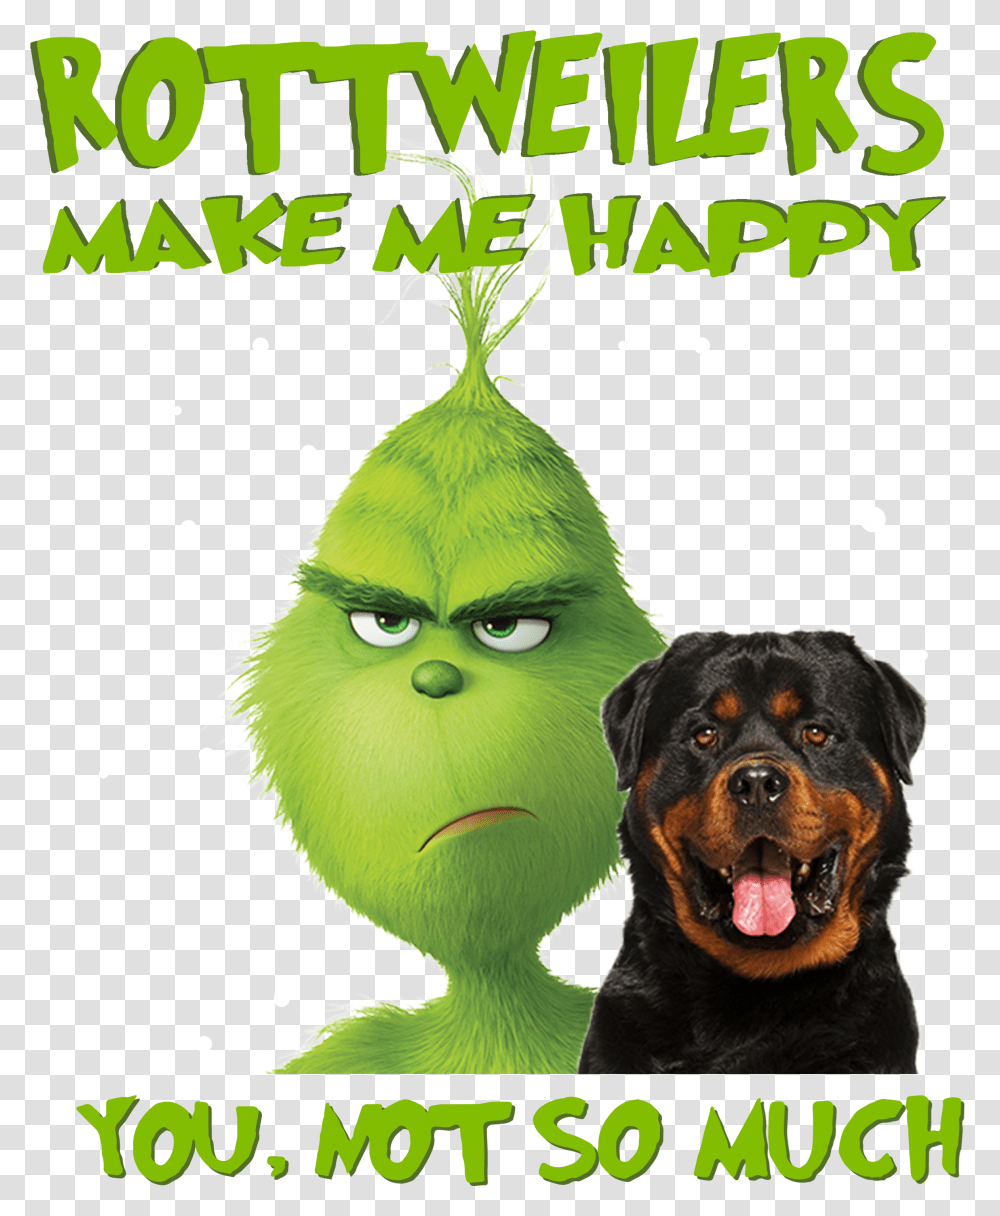 Grinch Rottweilers Make Me Happy Christmas Shirt Sweater Rottweiler Grinch Transparent Png